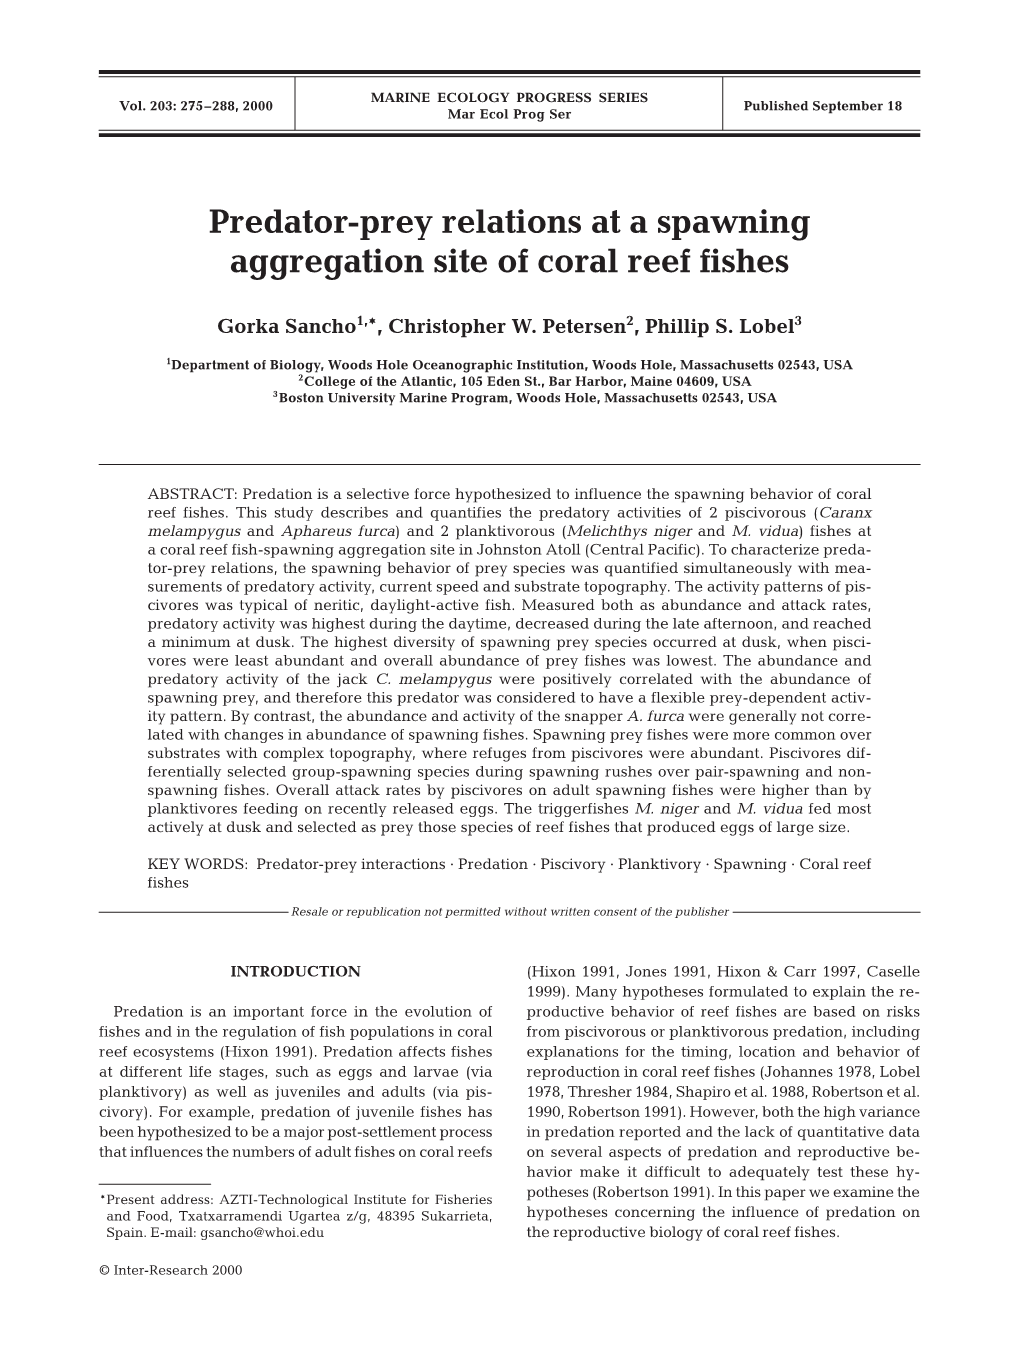 Predator-Prey Relations at a Spawning Aggregation Site of Coral Reef Fishes